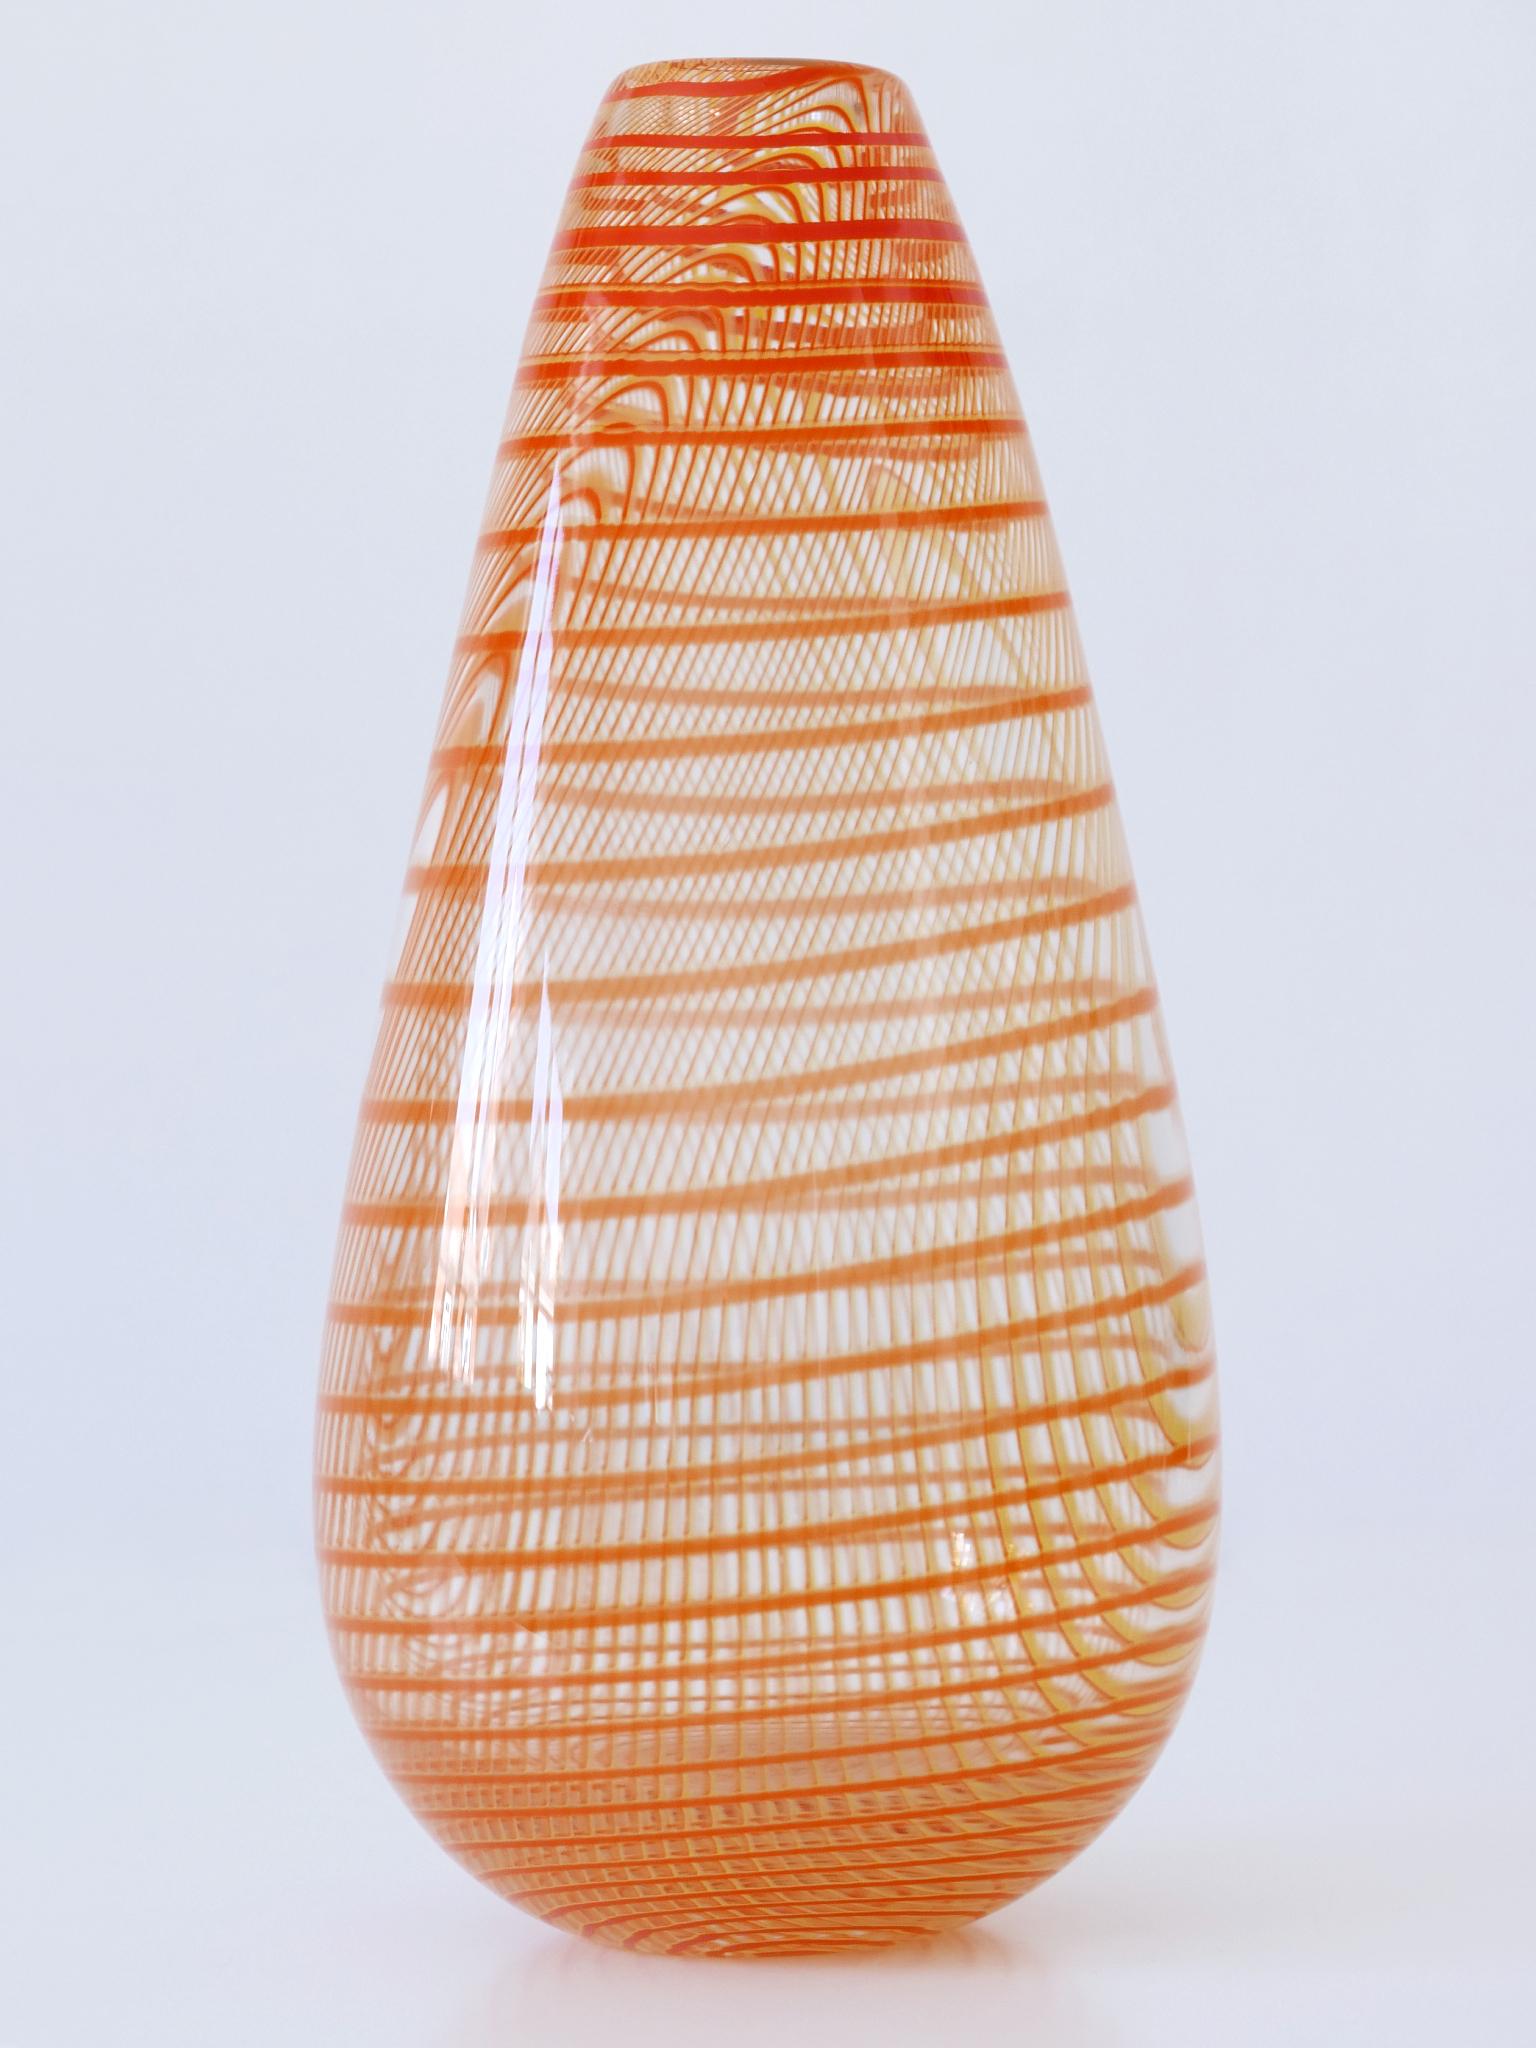 Signed & Limited Edition Art Glass Vase by Olle Brozén for Kosta Boda Sweden In Good Condition For Sale In Munich, DE